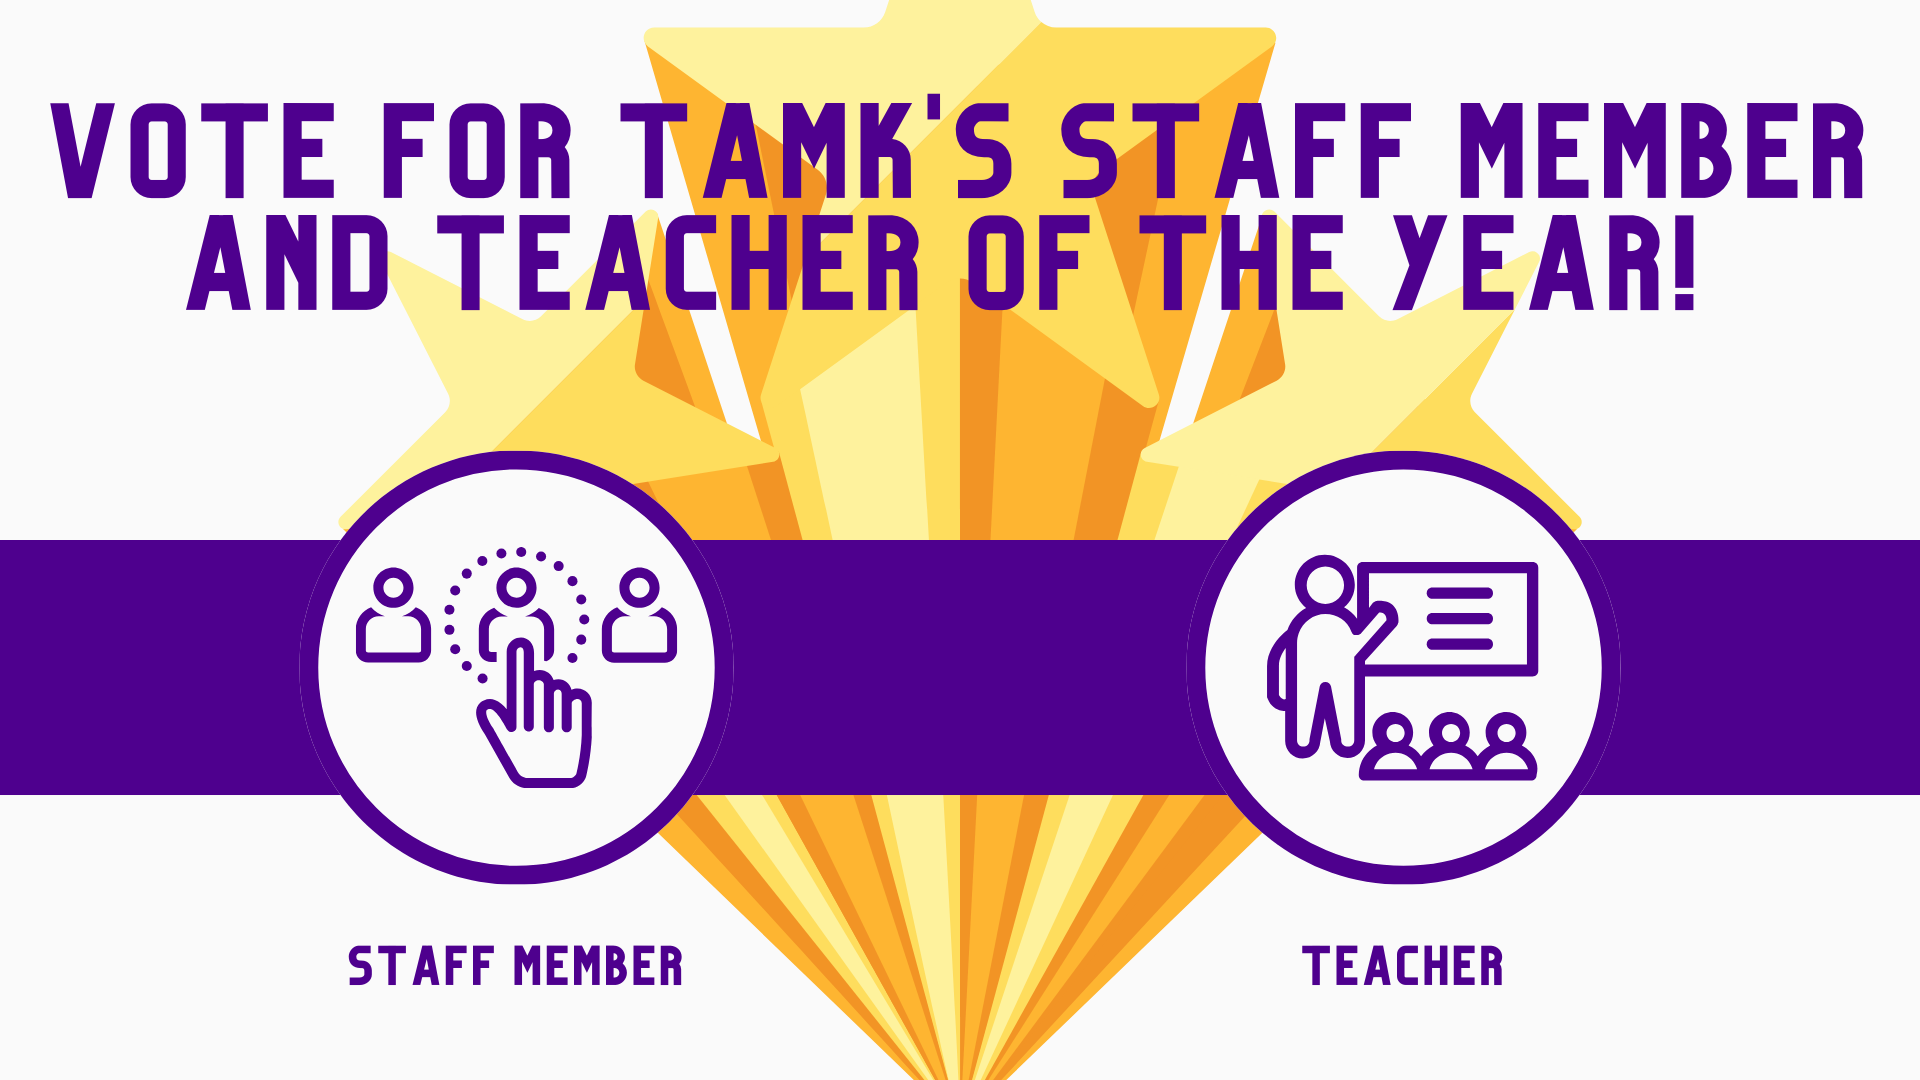 Suggest TAMK’s staff member and teacher of the year